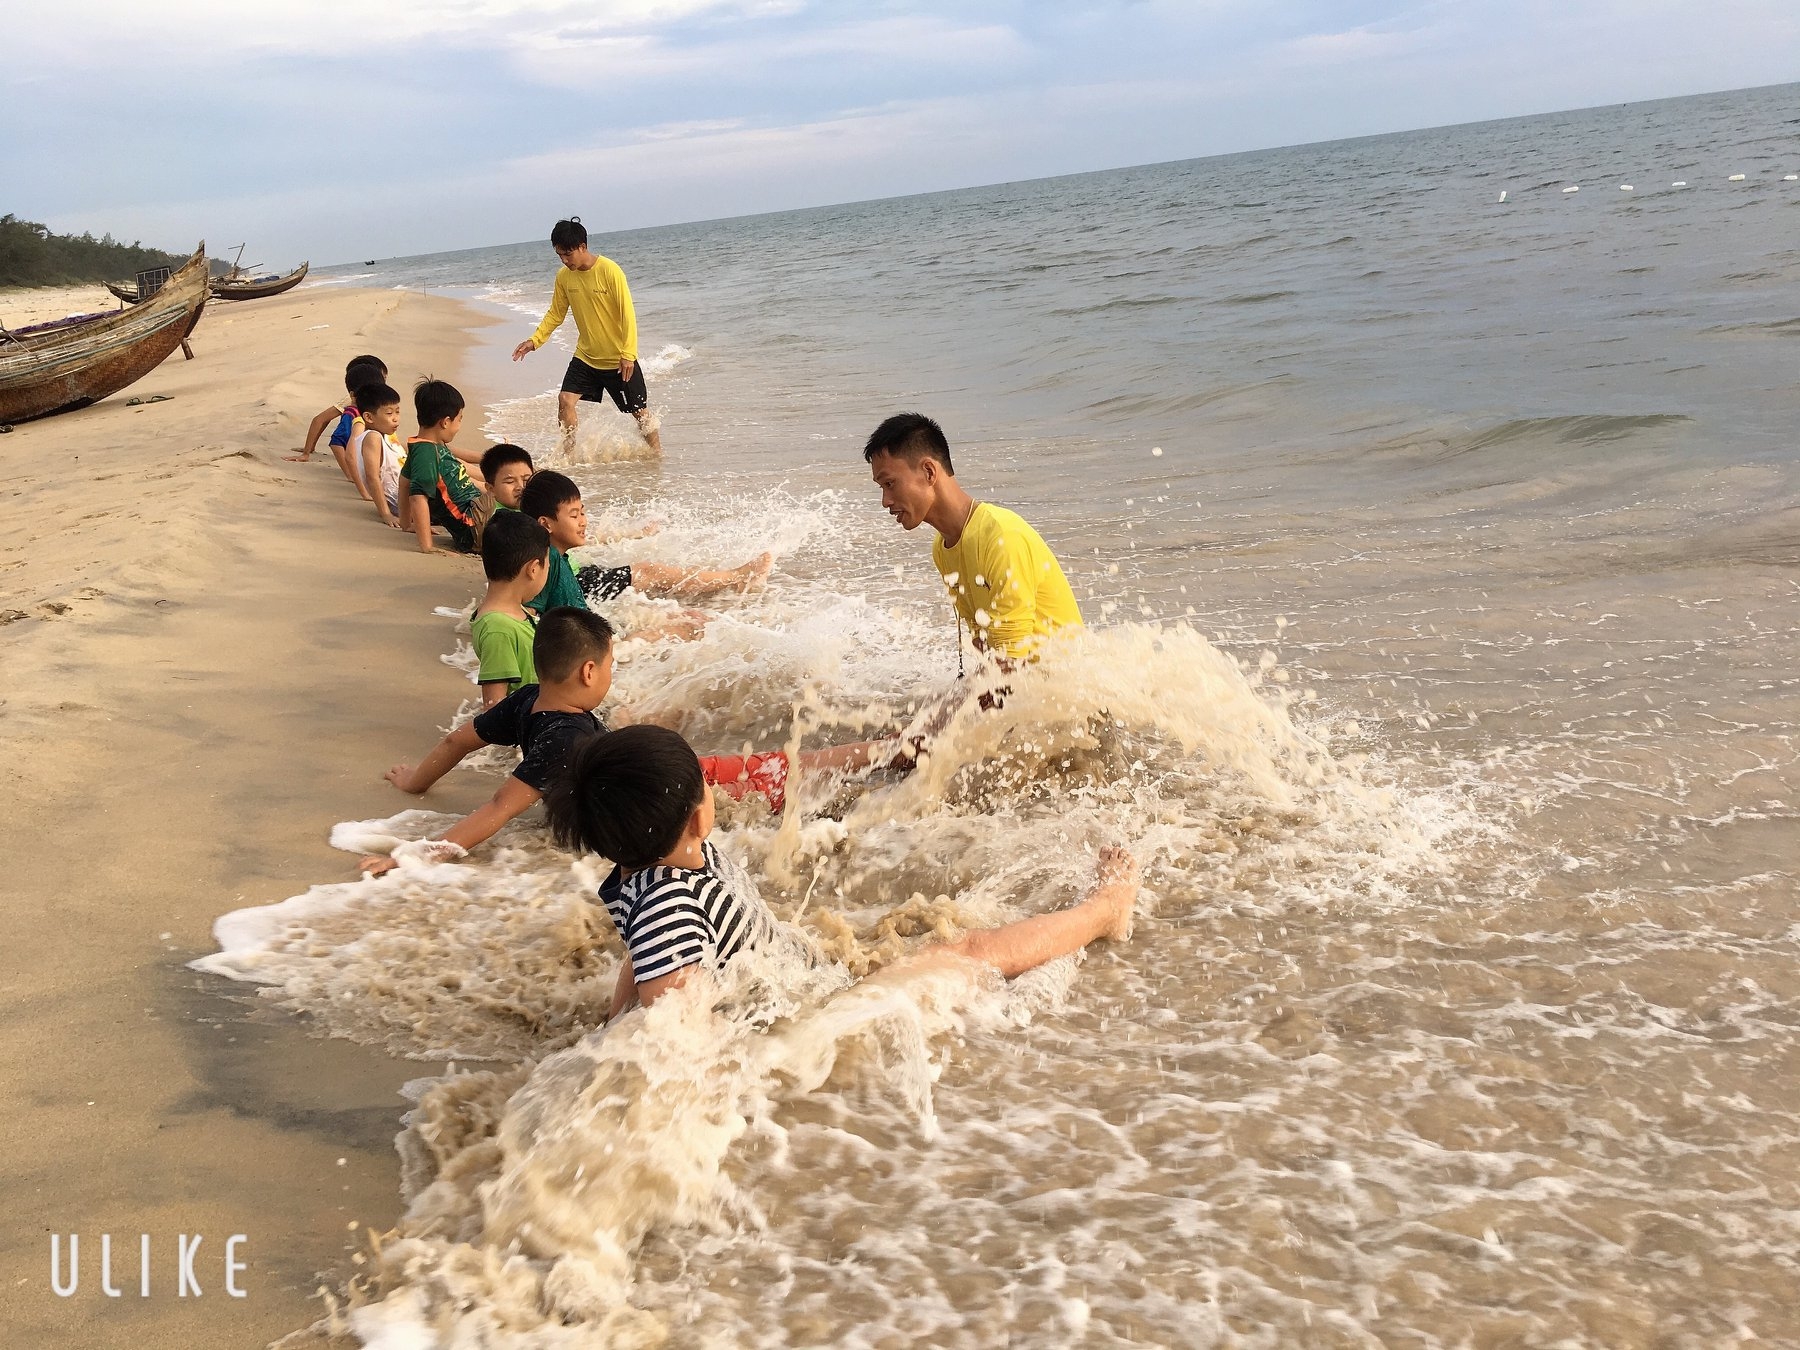 Hue Help Continues "Swimming for Safely" Project For Students in Thua Thien Hue